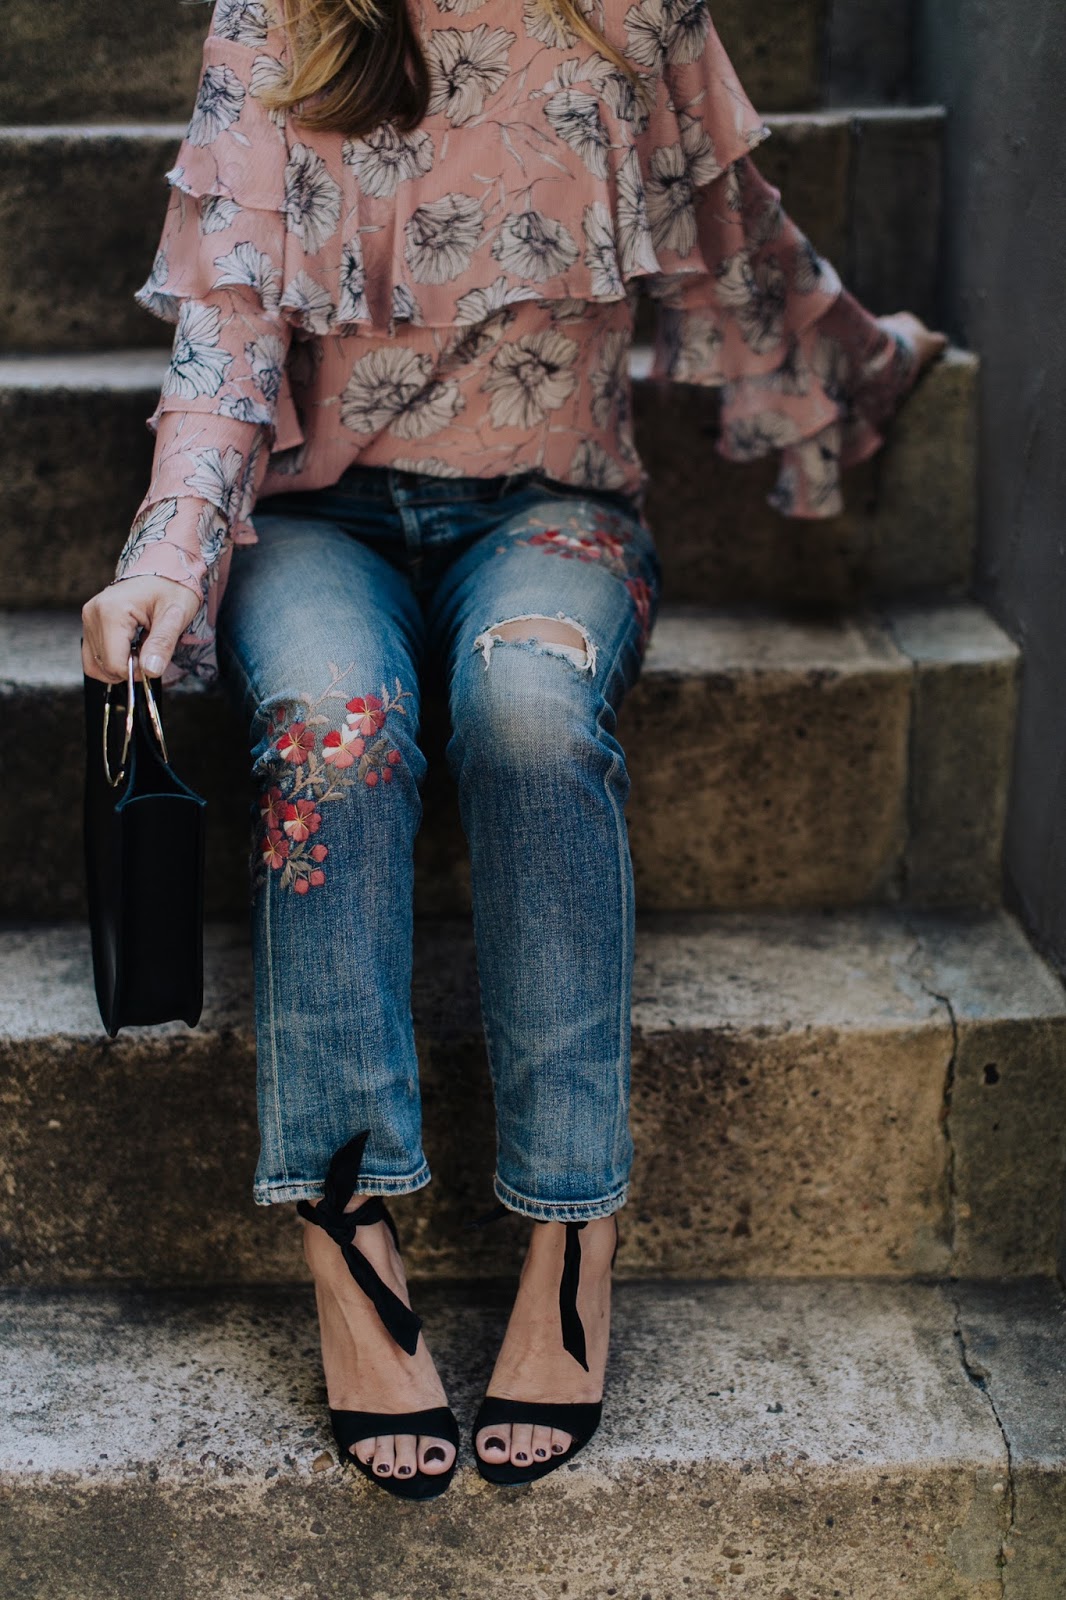 decorated denim, denim styles, denim trends, embroidered denim, patchwork denim, south moon under, denim, blogger, style, outfit, inspiration, citizens of humanity, a gold e, jeans, floral, future glory bag